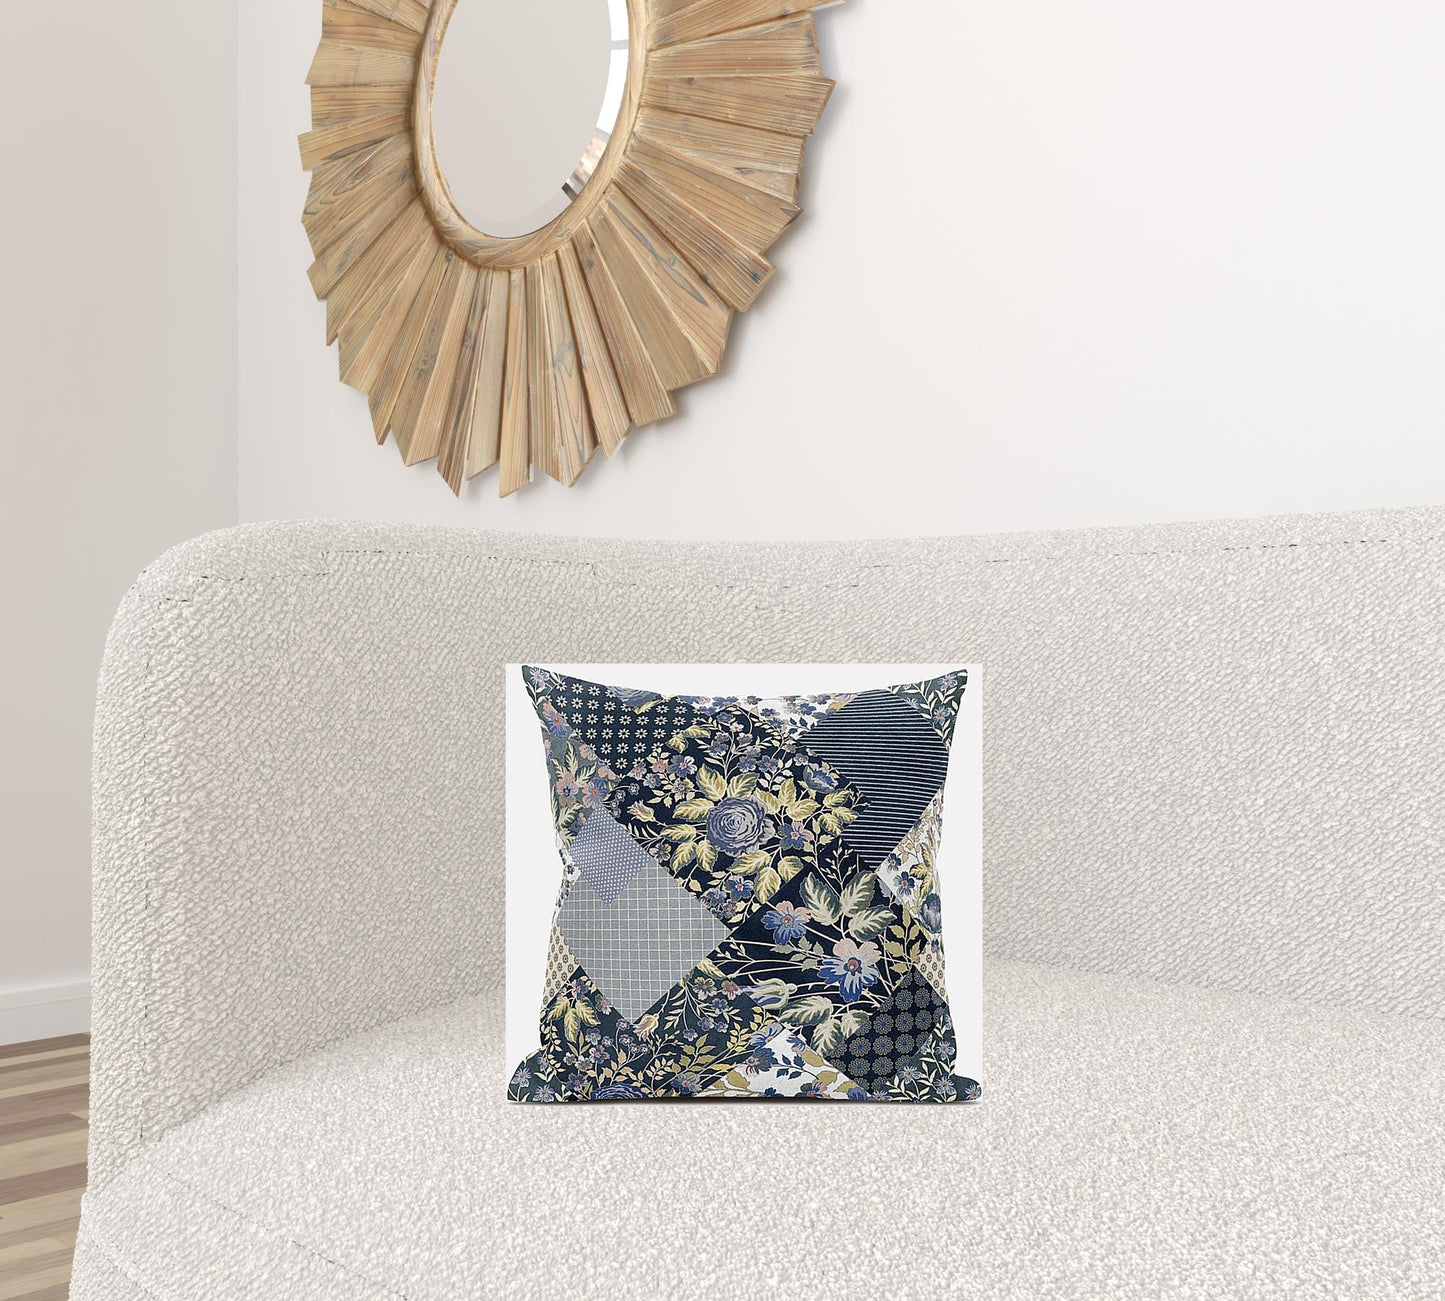 16" Black Yellow Floral Suede Throw Pillow